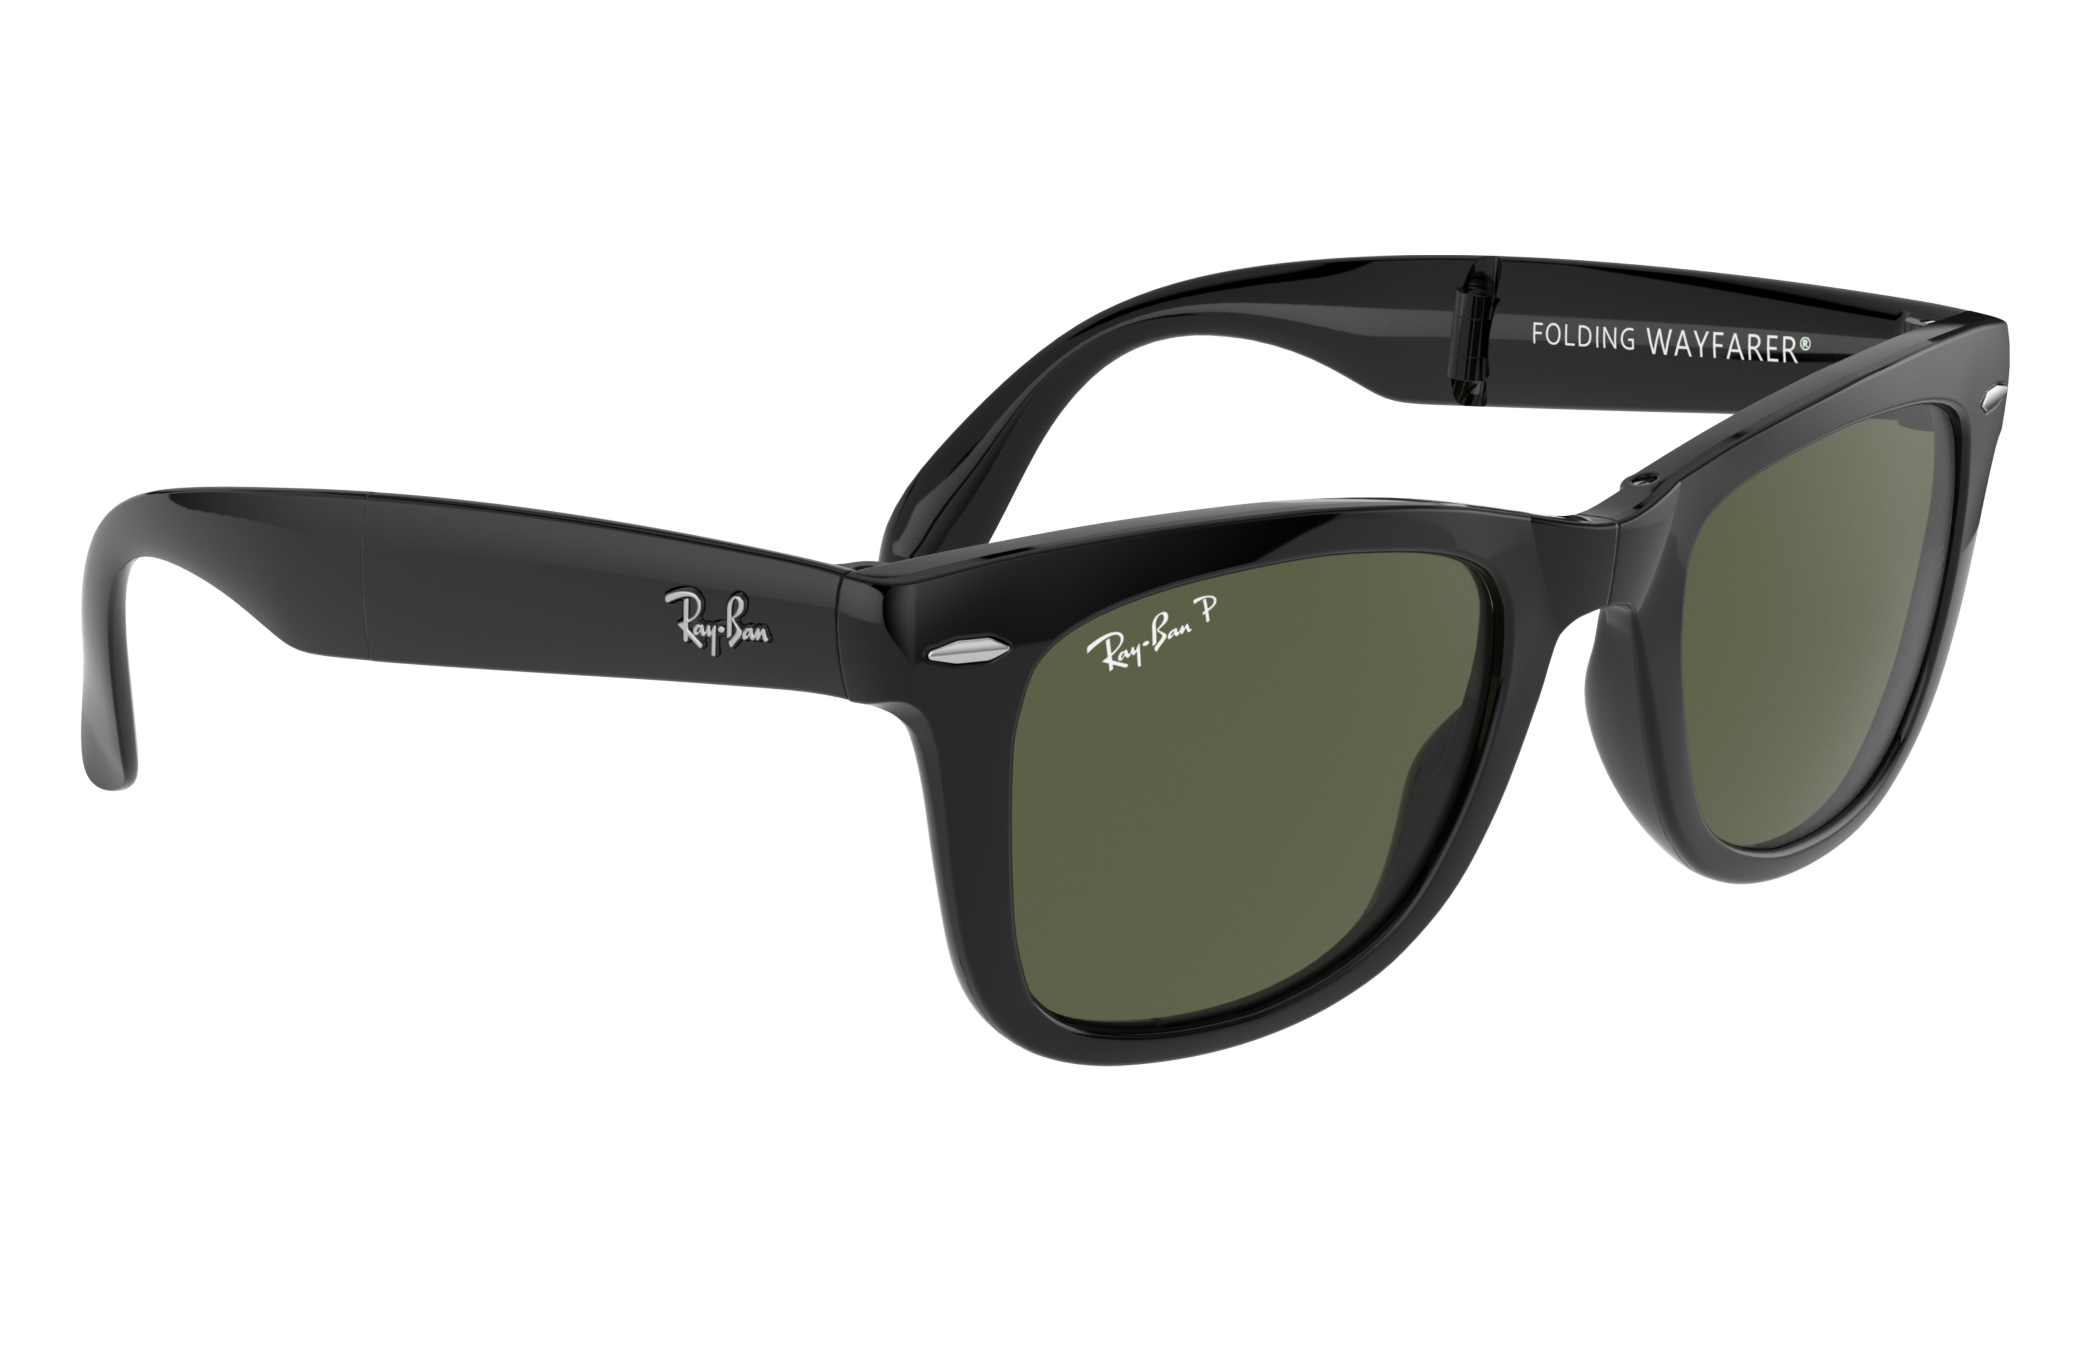 ray ban folding wayfarers rb4105 in matte black and violet mirror lenses